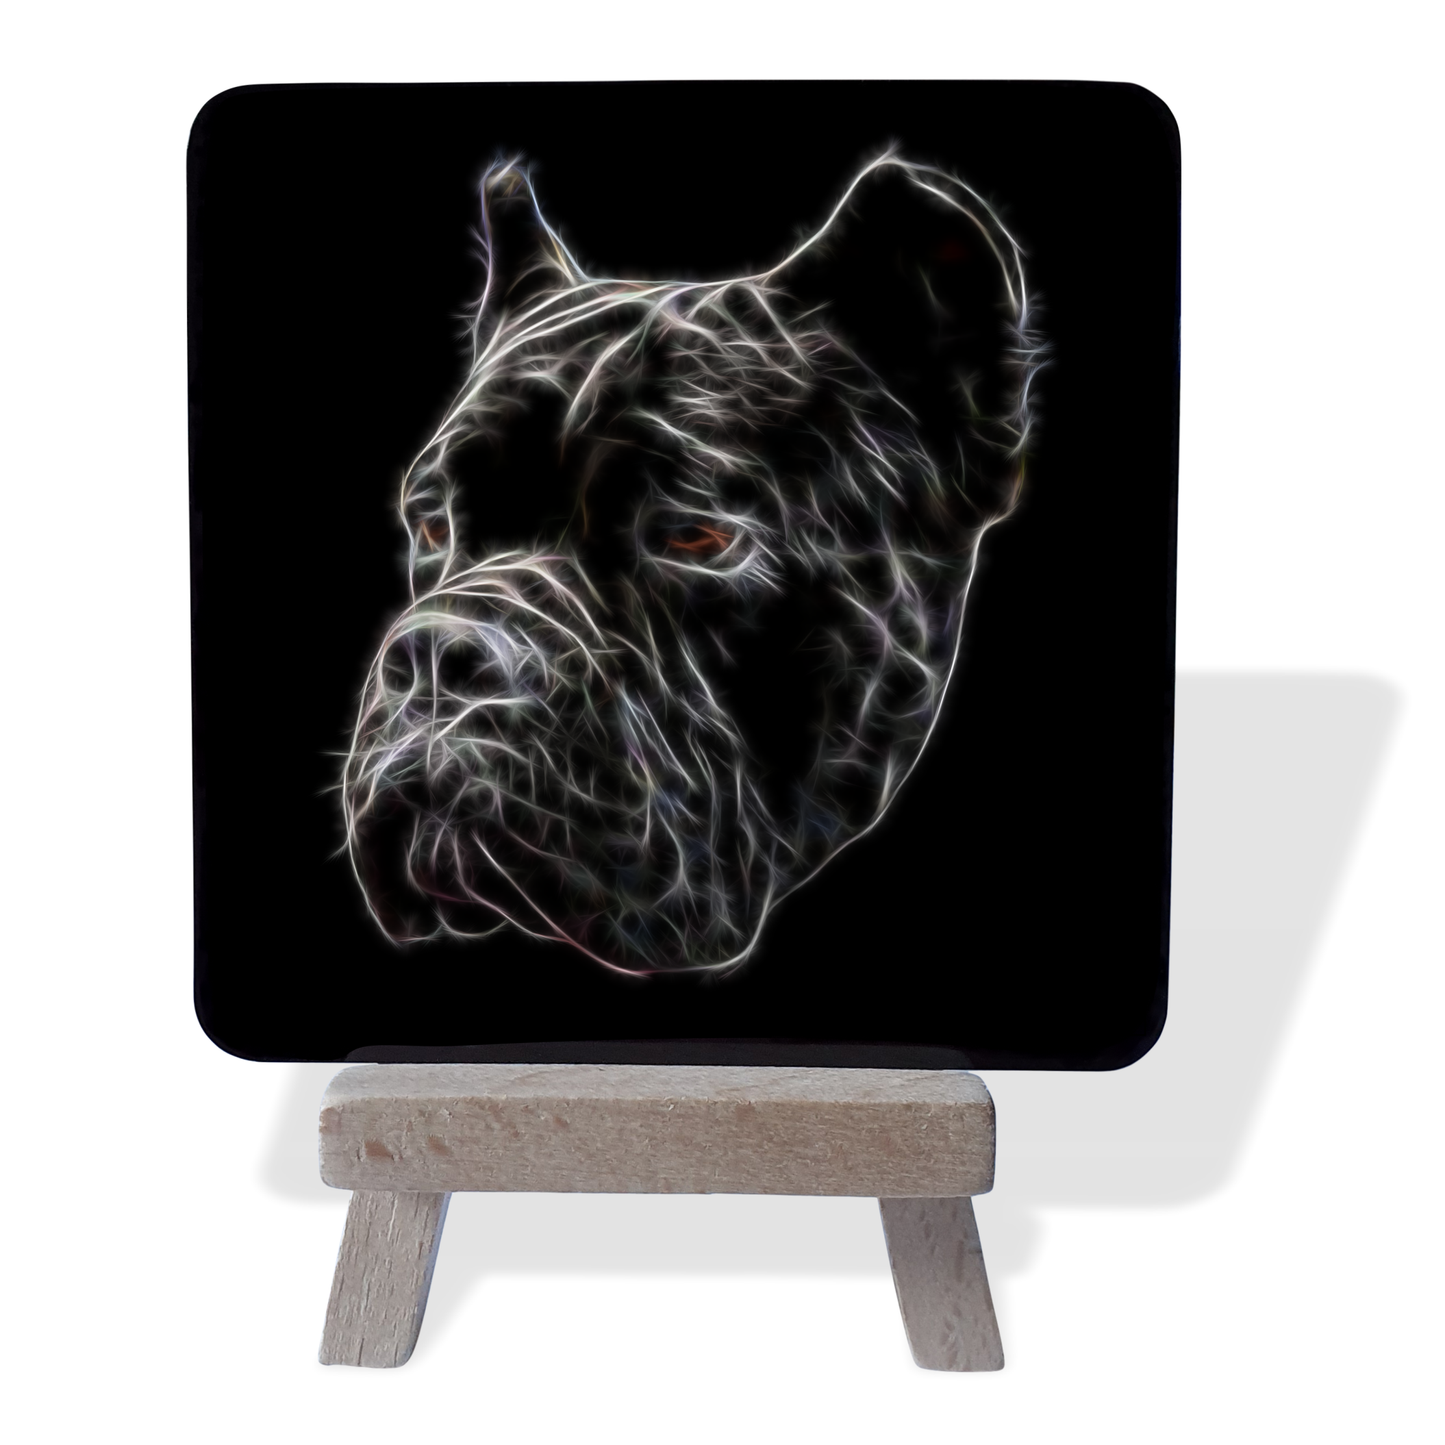 Cane Corso #1 Metal Plaque and Mini Easel with Fractal Art Design